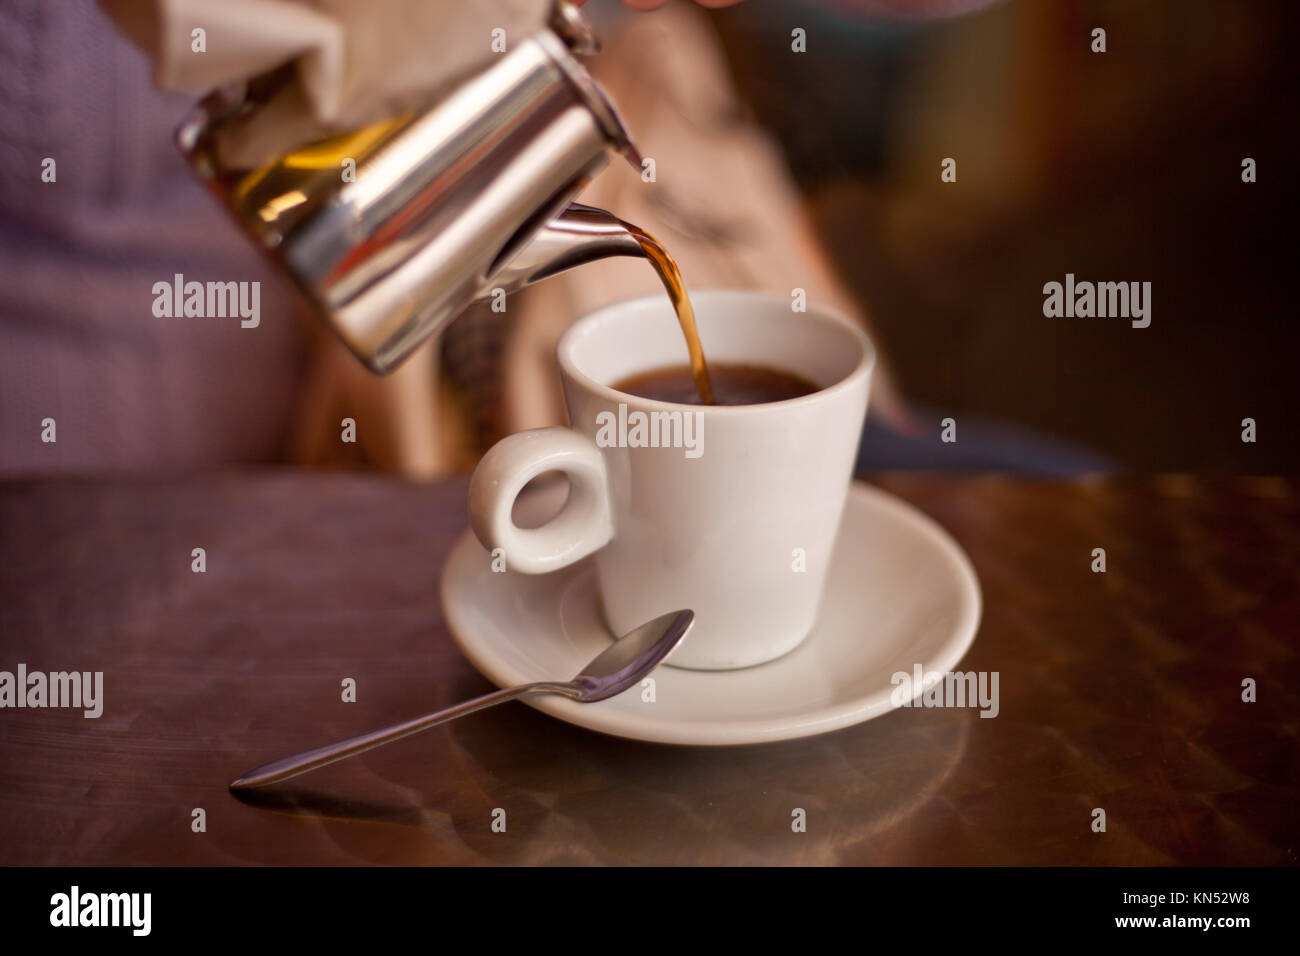 Serving tea from a metal teapont in a white ceramic cup on restaurant terrace table. Selective focus. Stock Photo